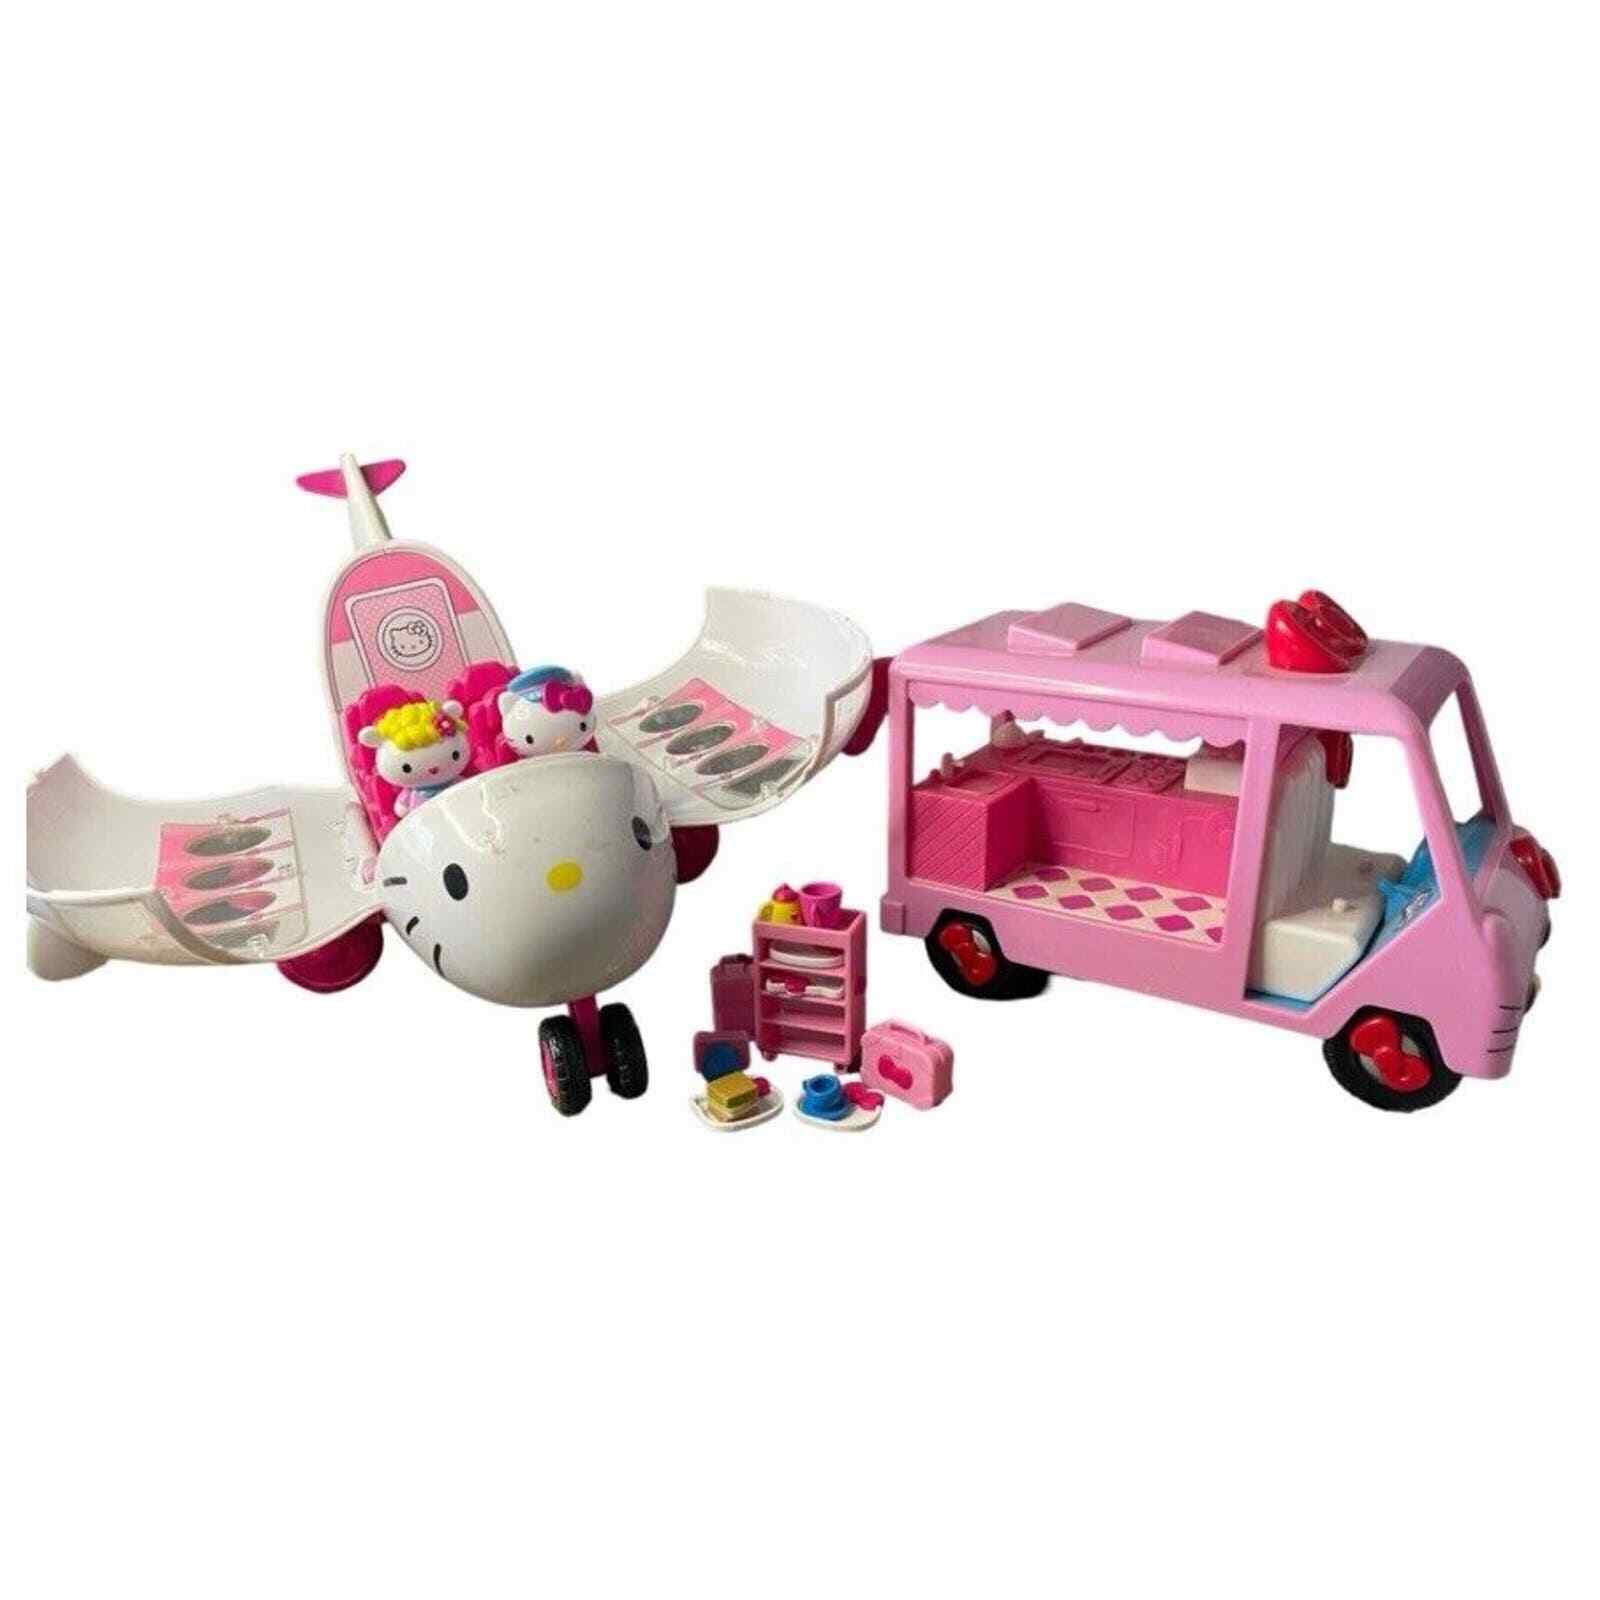 Hello Kitty Plane & Food Truck 6 Figures Table Carts Plates 2013 **Flaws**Read**